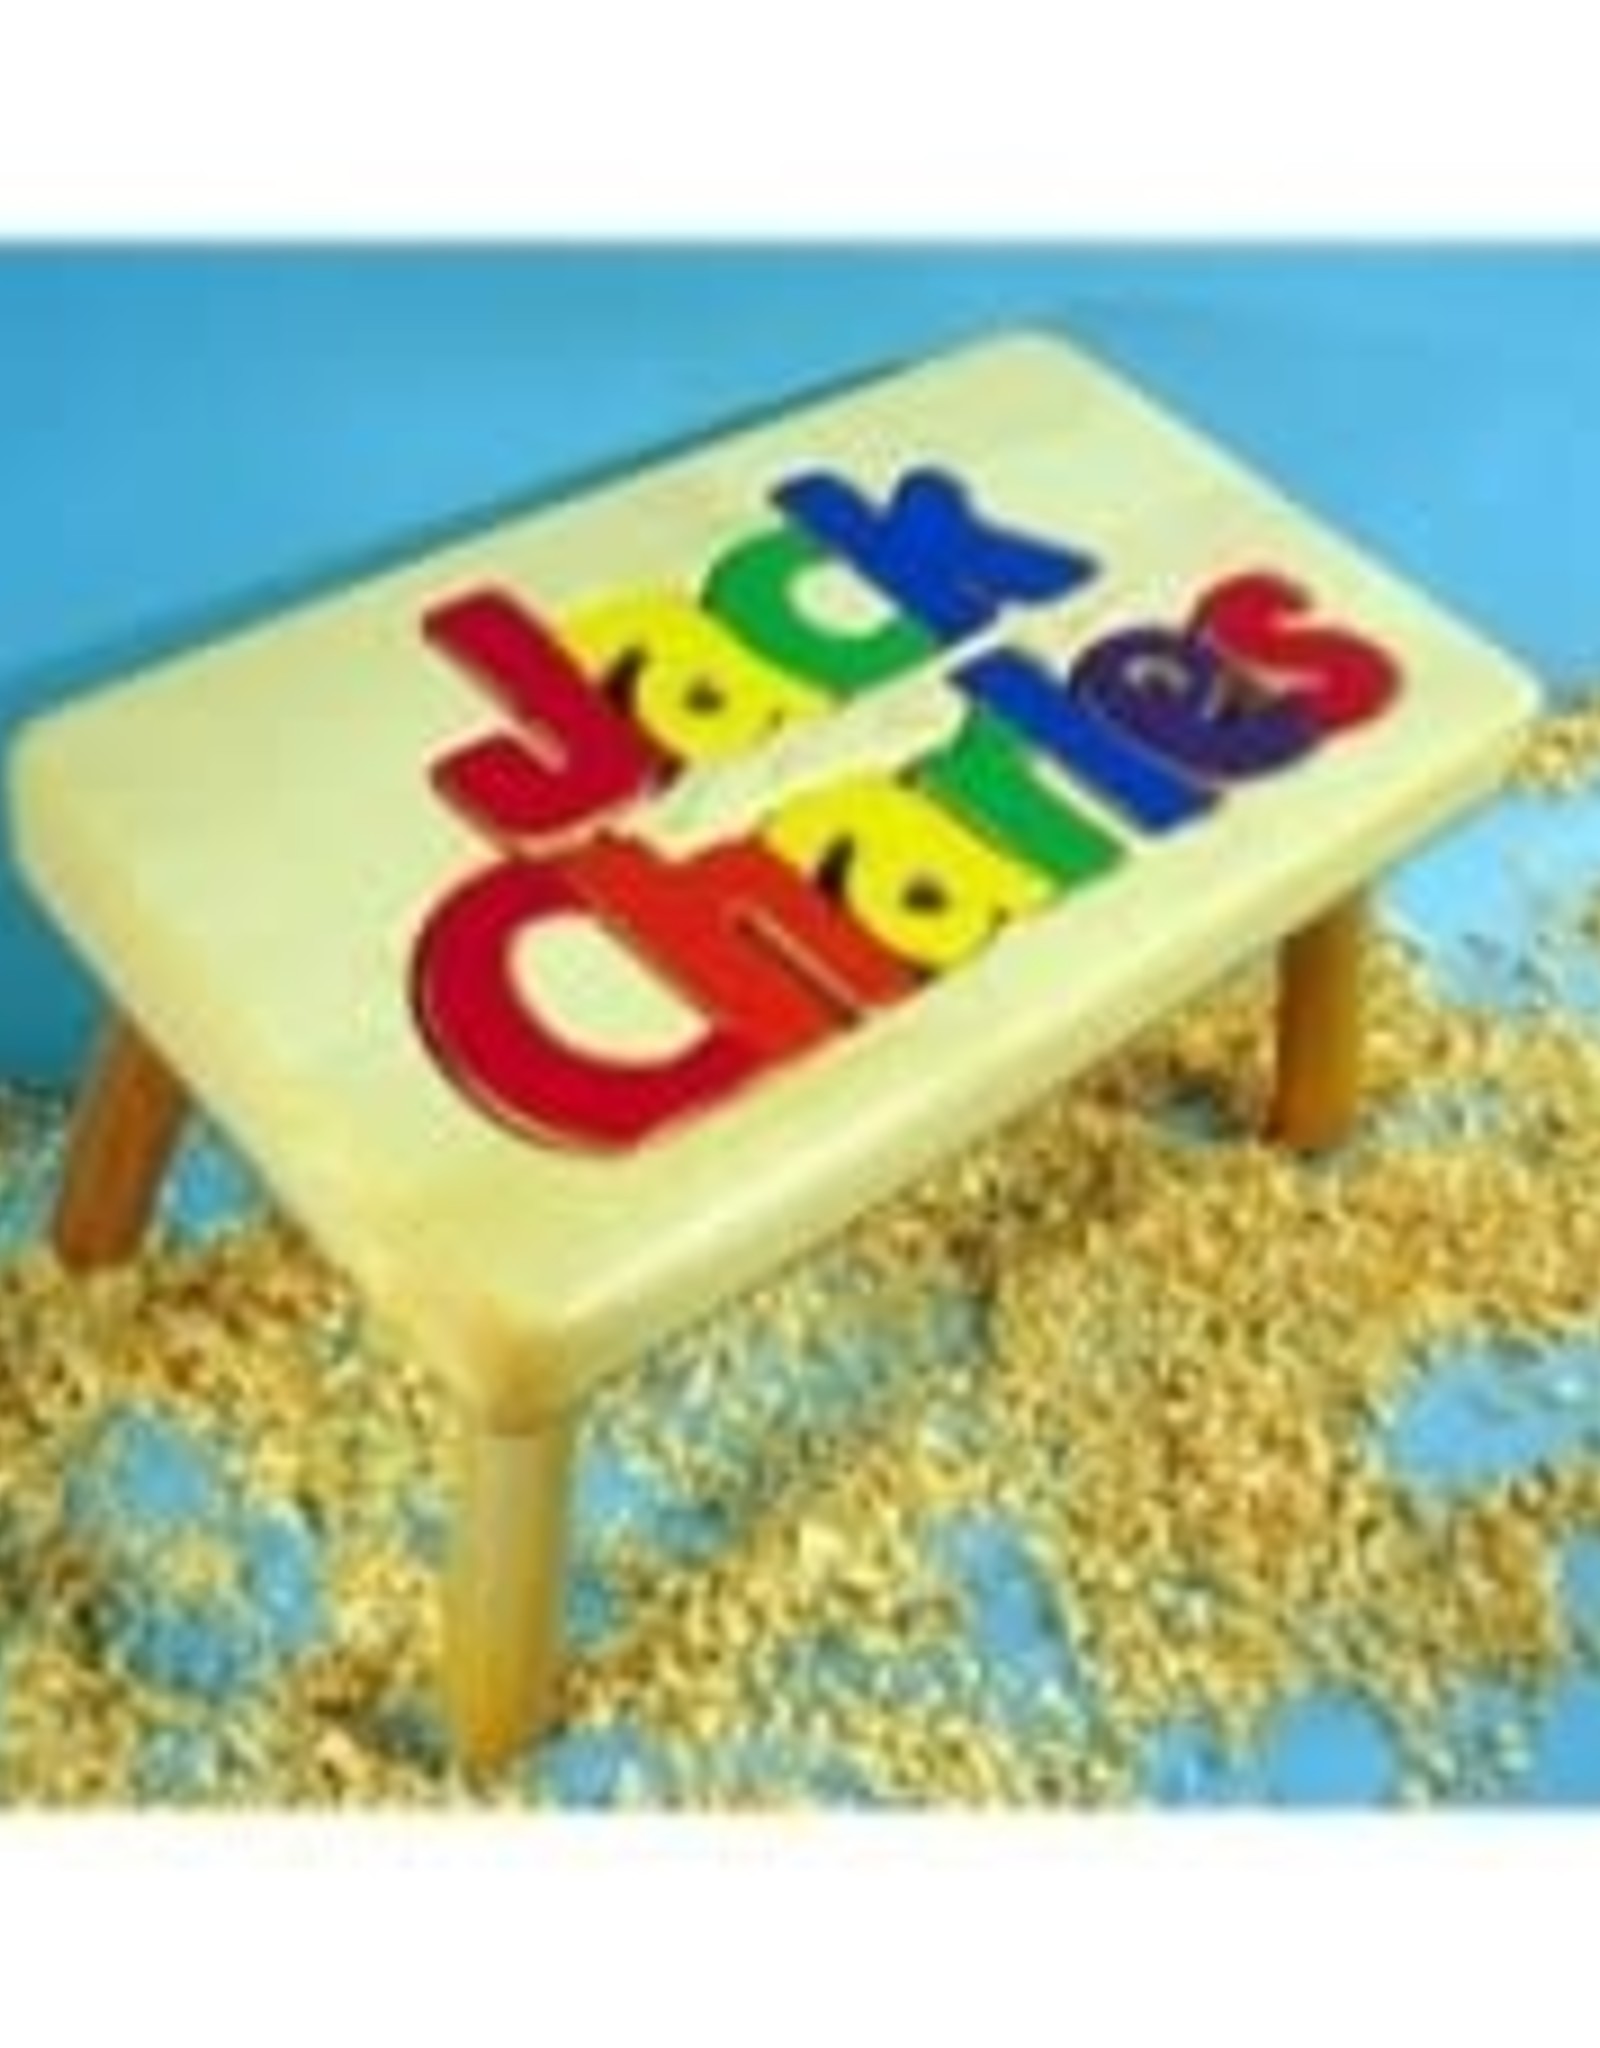 Cubbyhole Toys Natural Stool 2-Name